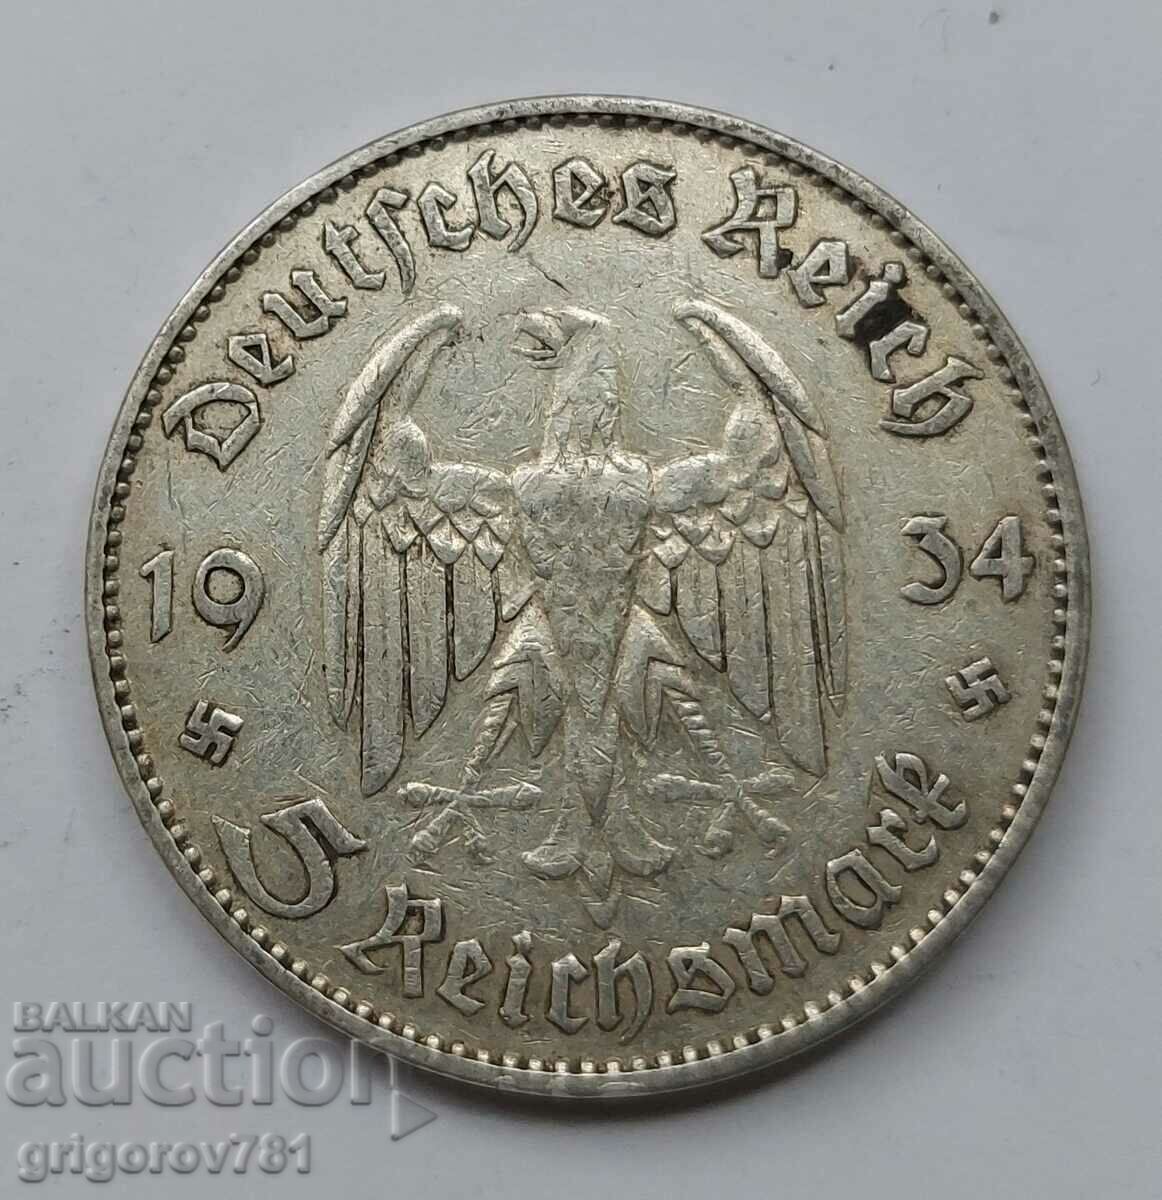 5 Mark Silver Germany 1934 J III Reich Silver Coin #80